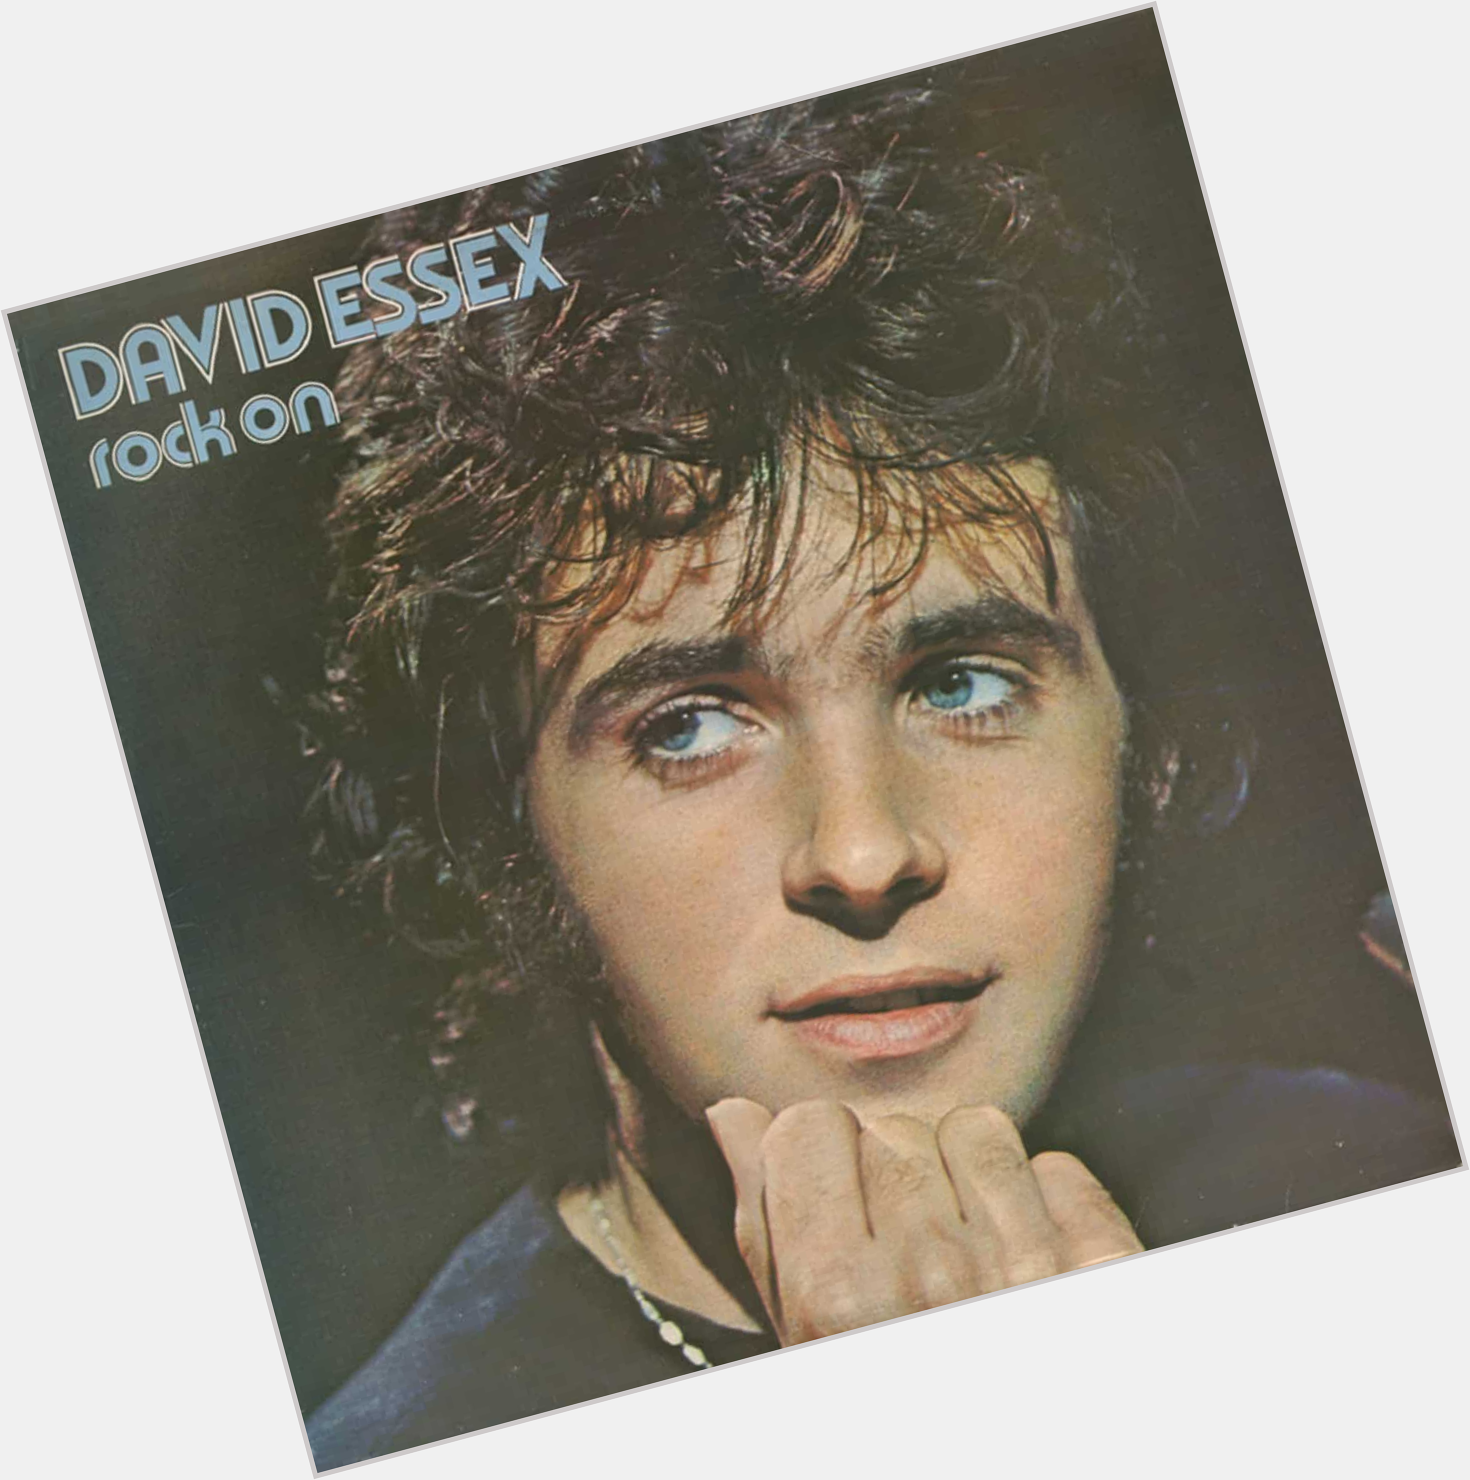 Happy bday to one of Peterboroughs most famous sons. David Essex! 